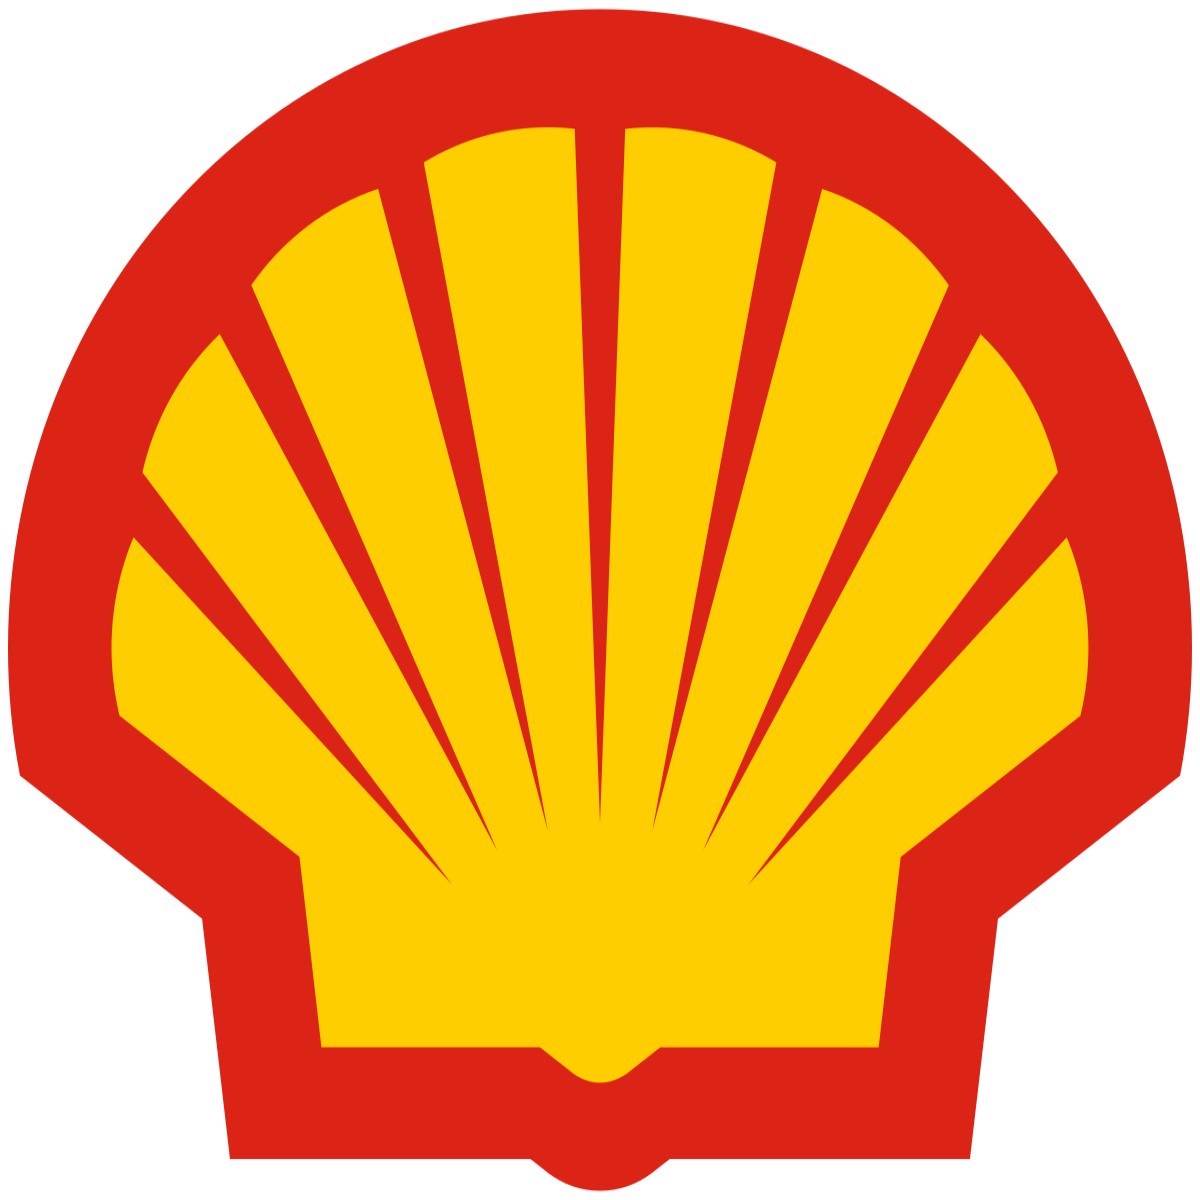 Shell Nigeria Assessed 2023 Internship Opportunities for Young Graduates